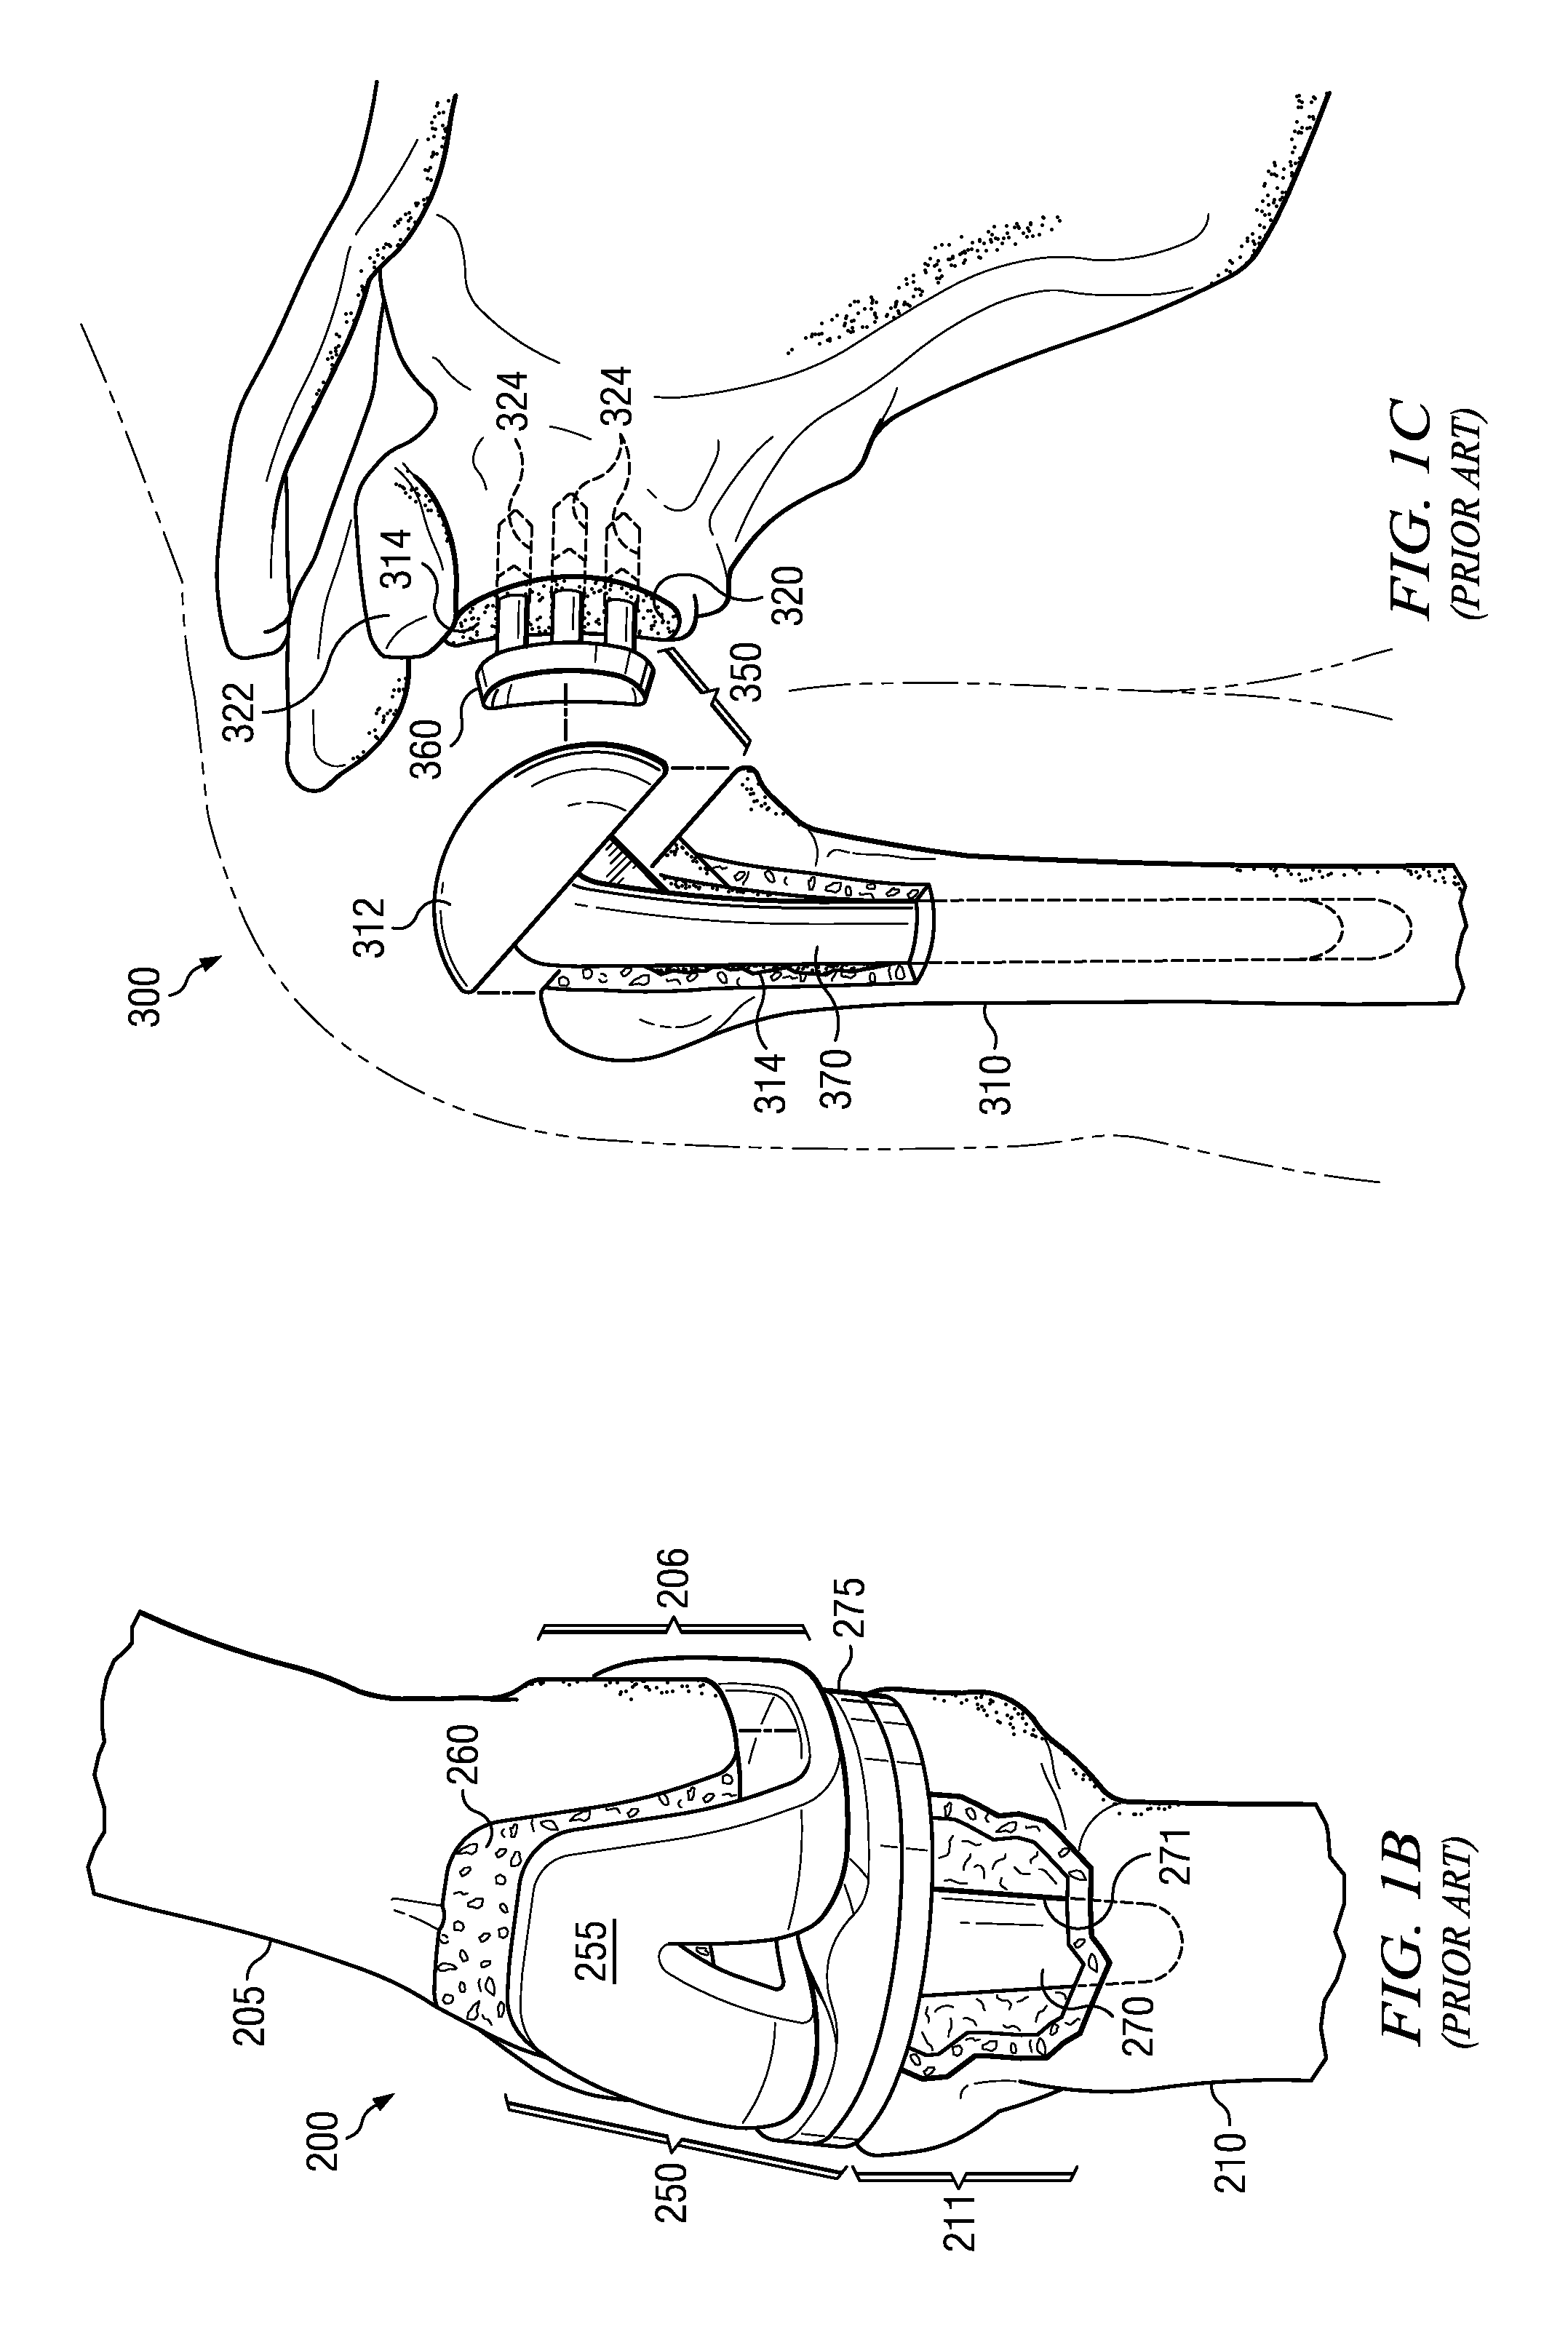 Electrosurgical system and method for treating hard body tissue